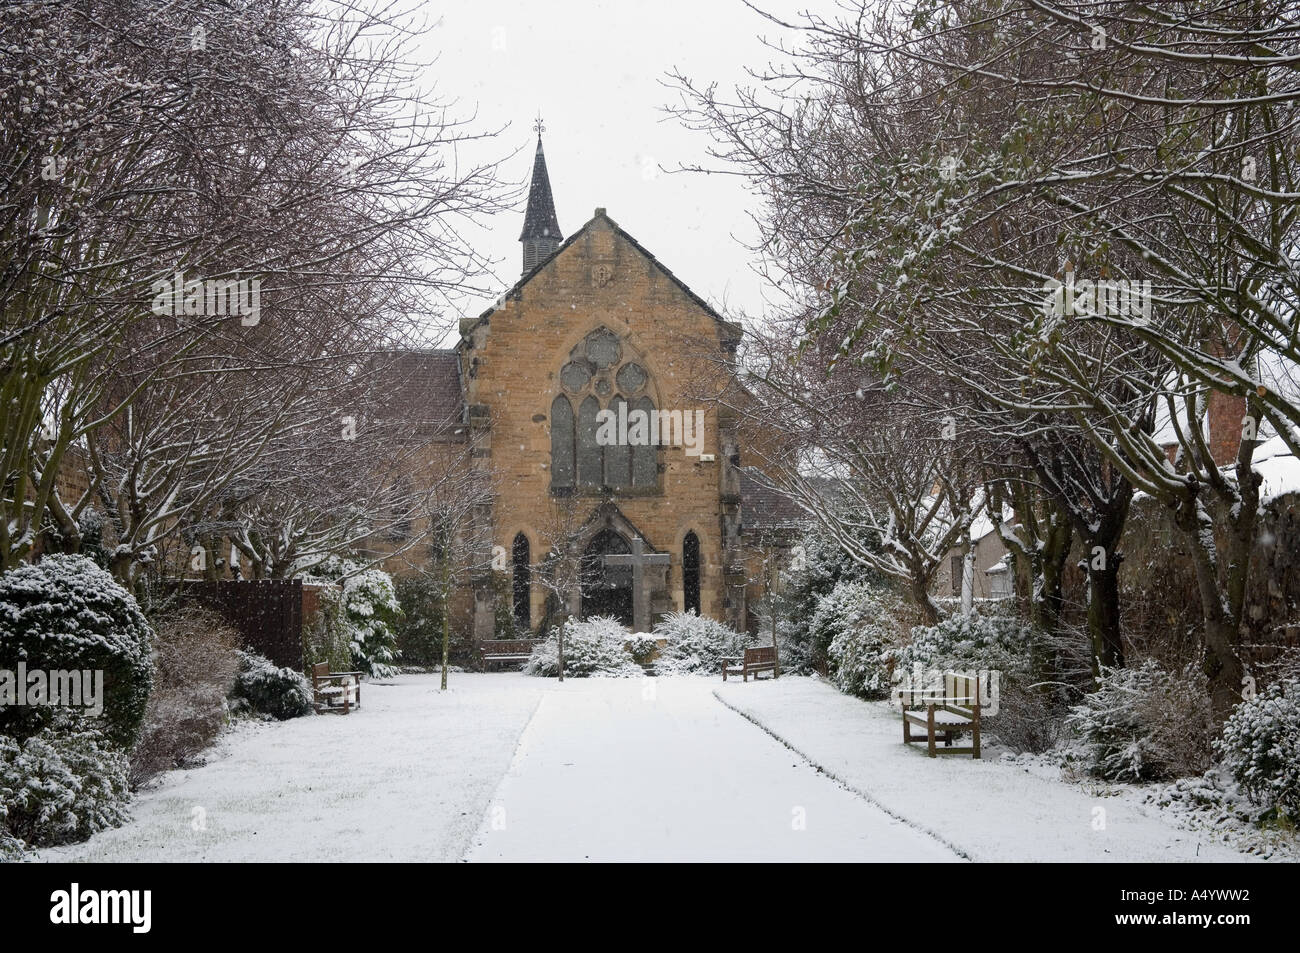 Small church and driveway covered in snow Stock Photo